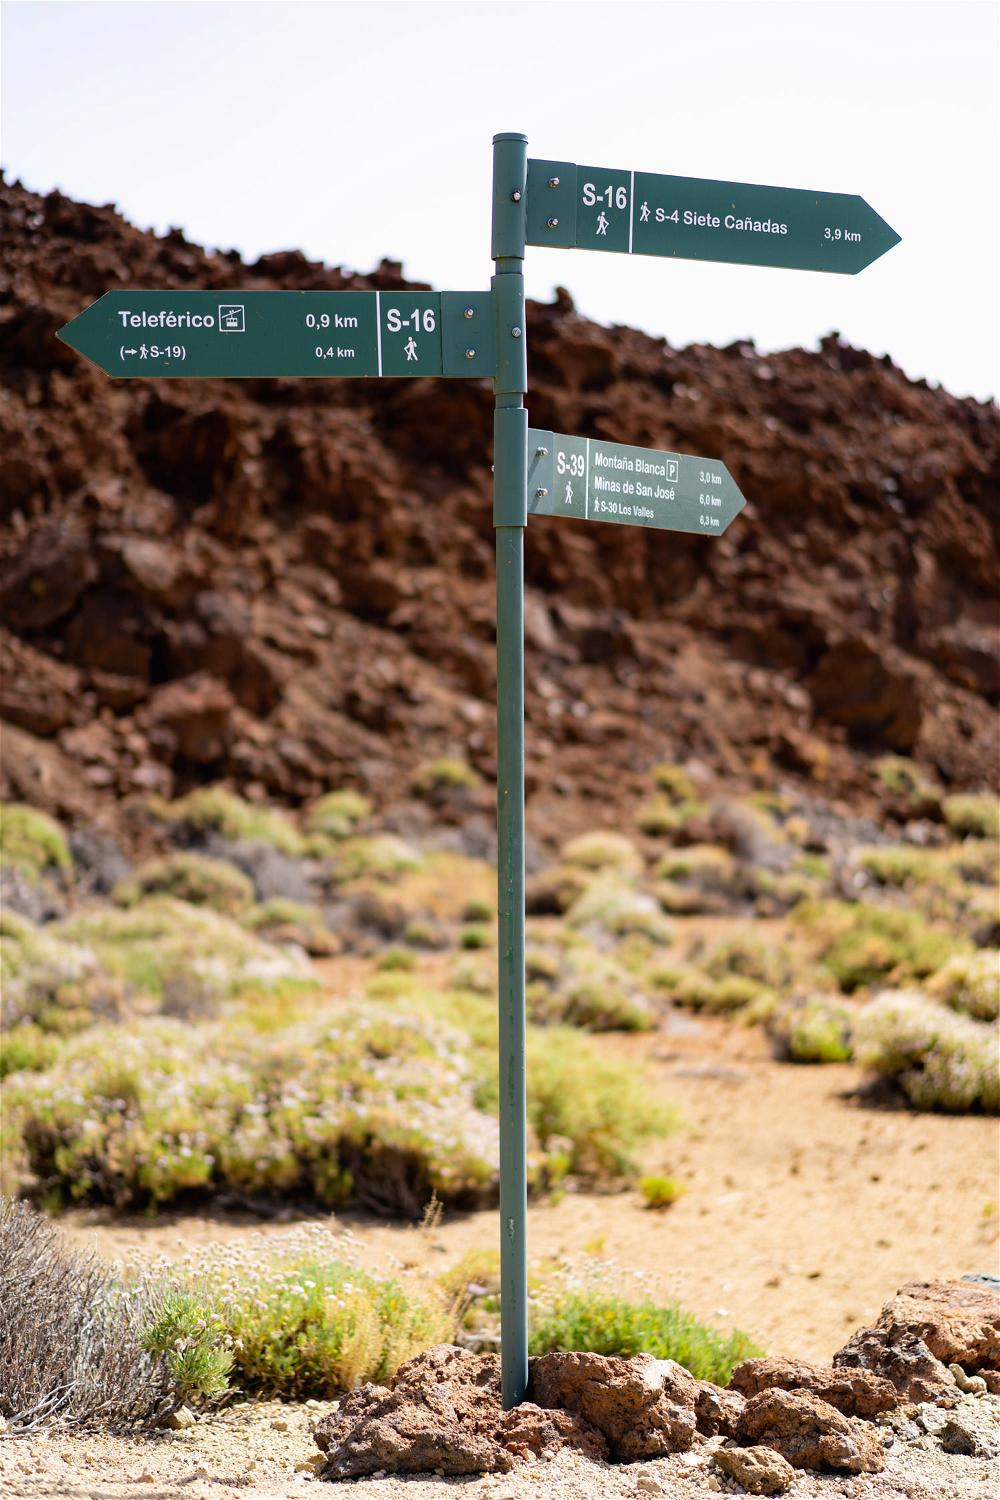 Hiking signs point travelers toward different hiking routes at El Teide